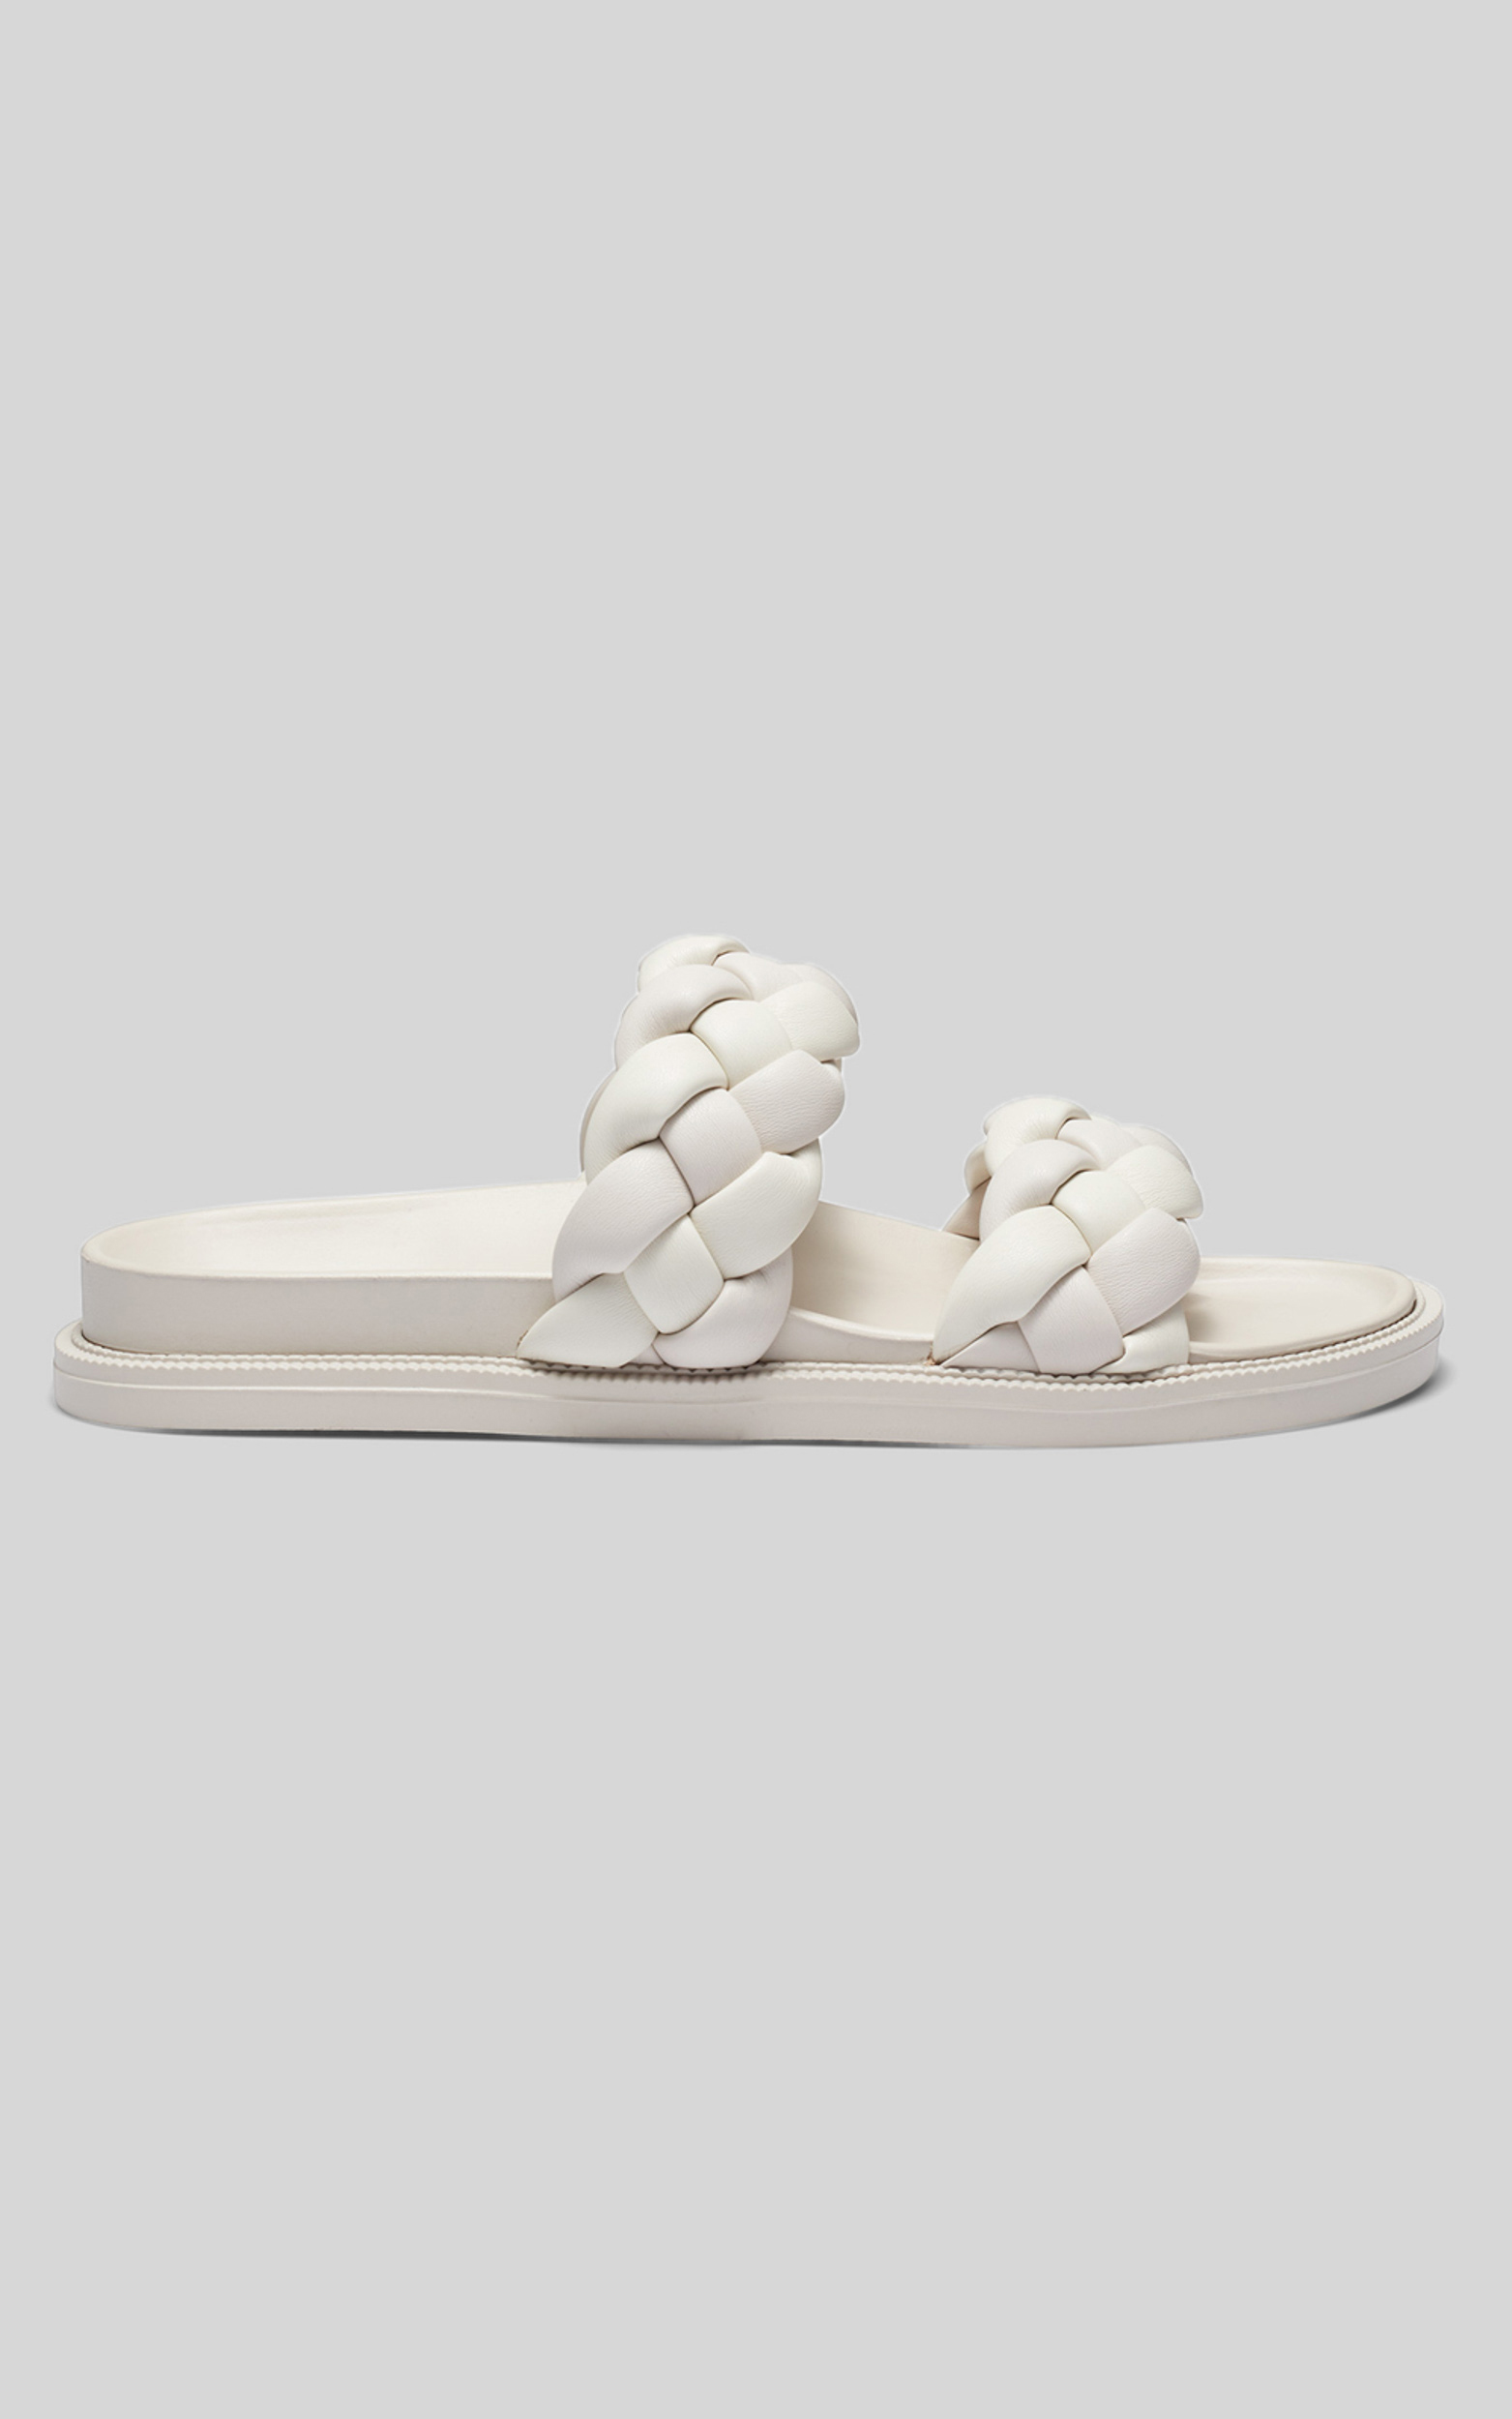 Therapy - Elle Sandals in Bone Tonal - 06, WHT2, hi-res image number null